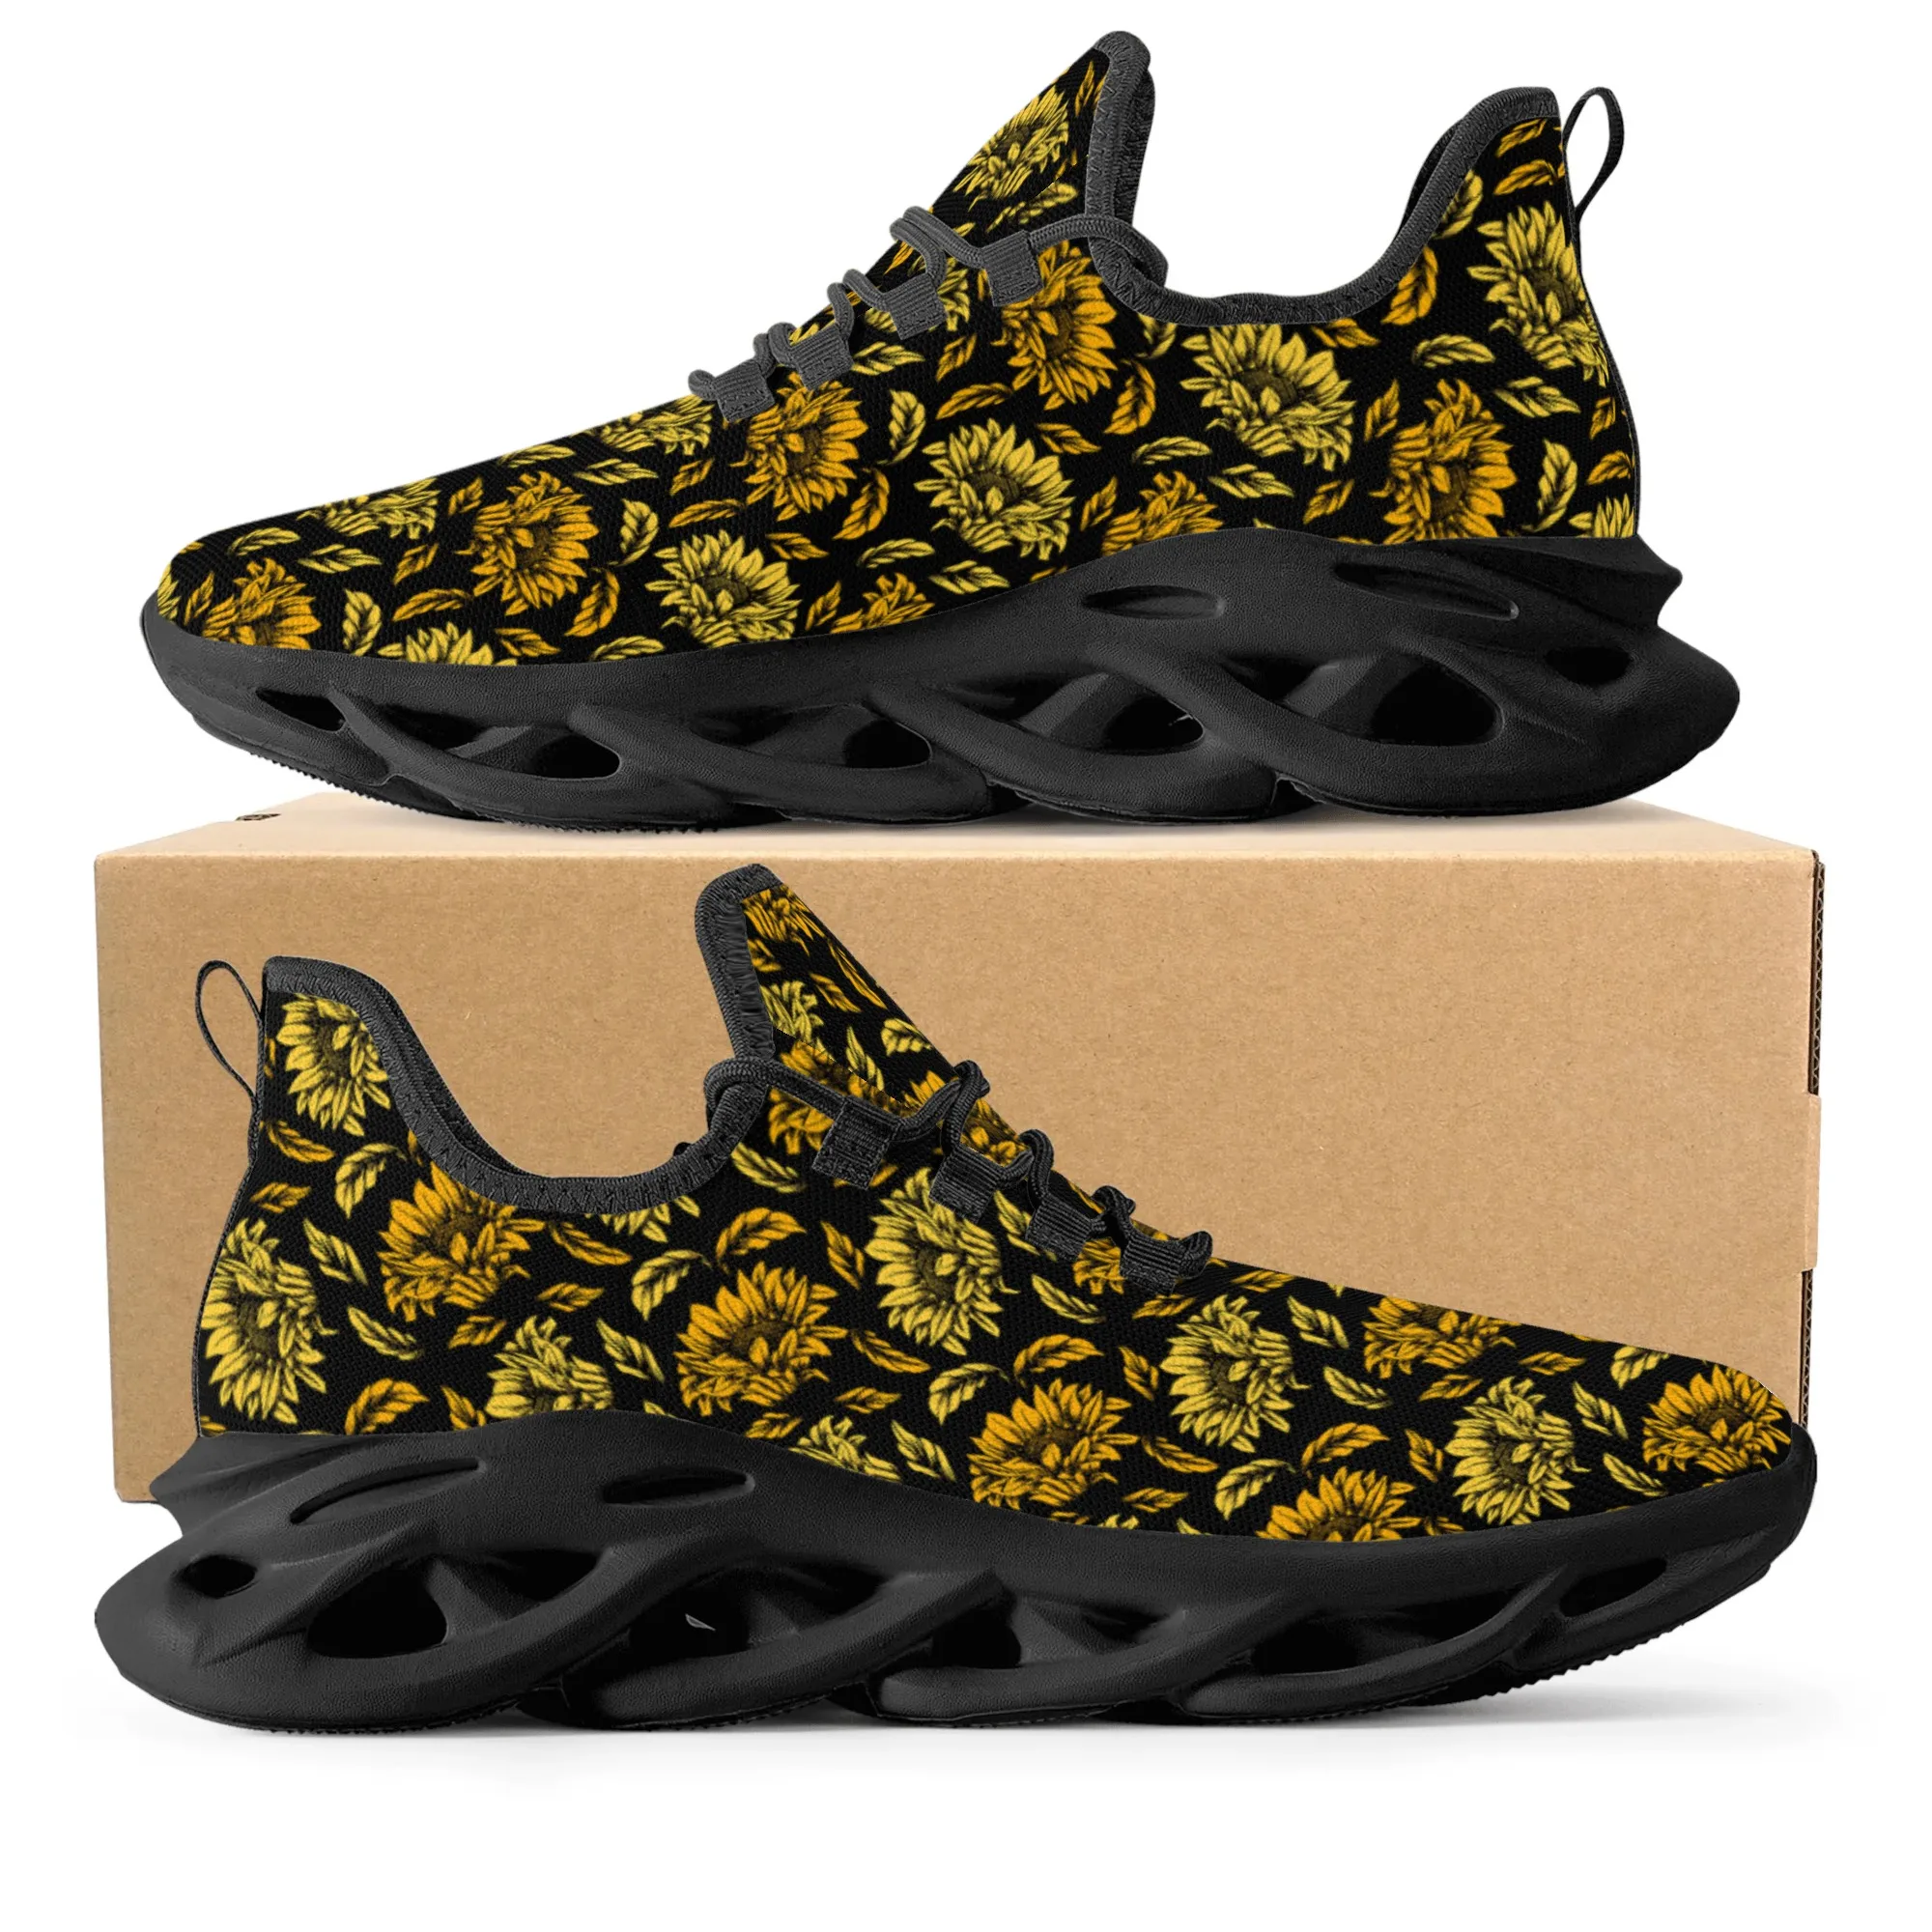 Sunflowers Print Design Fashion Funny Sneakers Men Women Teenager Breathable Mesh Casual Running Shoes Lace-Up Basketball Shoe sport running shoes men women air mesh breathable walking women sneakers comfortable white fashion casual sneakers